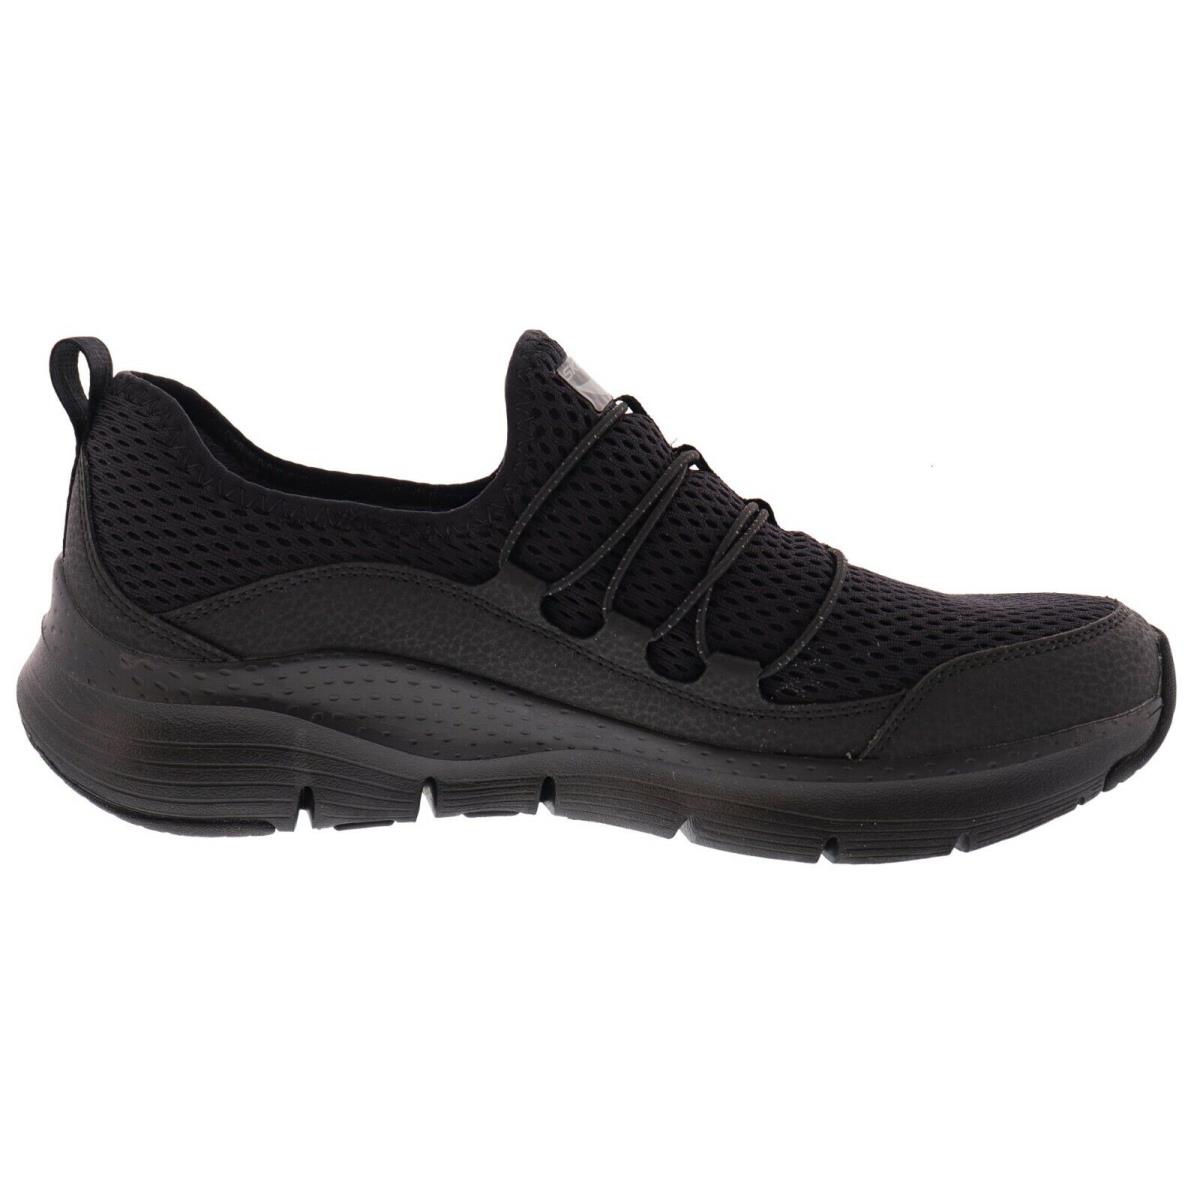 Skechers shoes ARCH LUCKY THOUGHTS - BLACK / BLACK 0